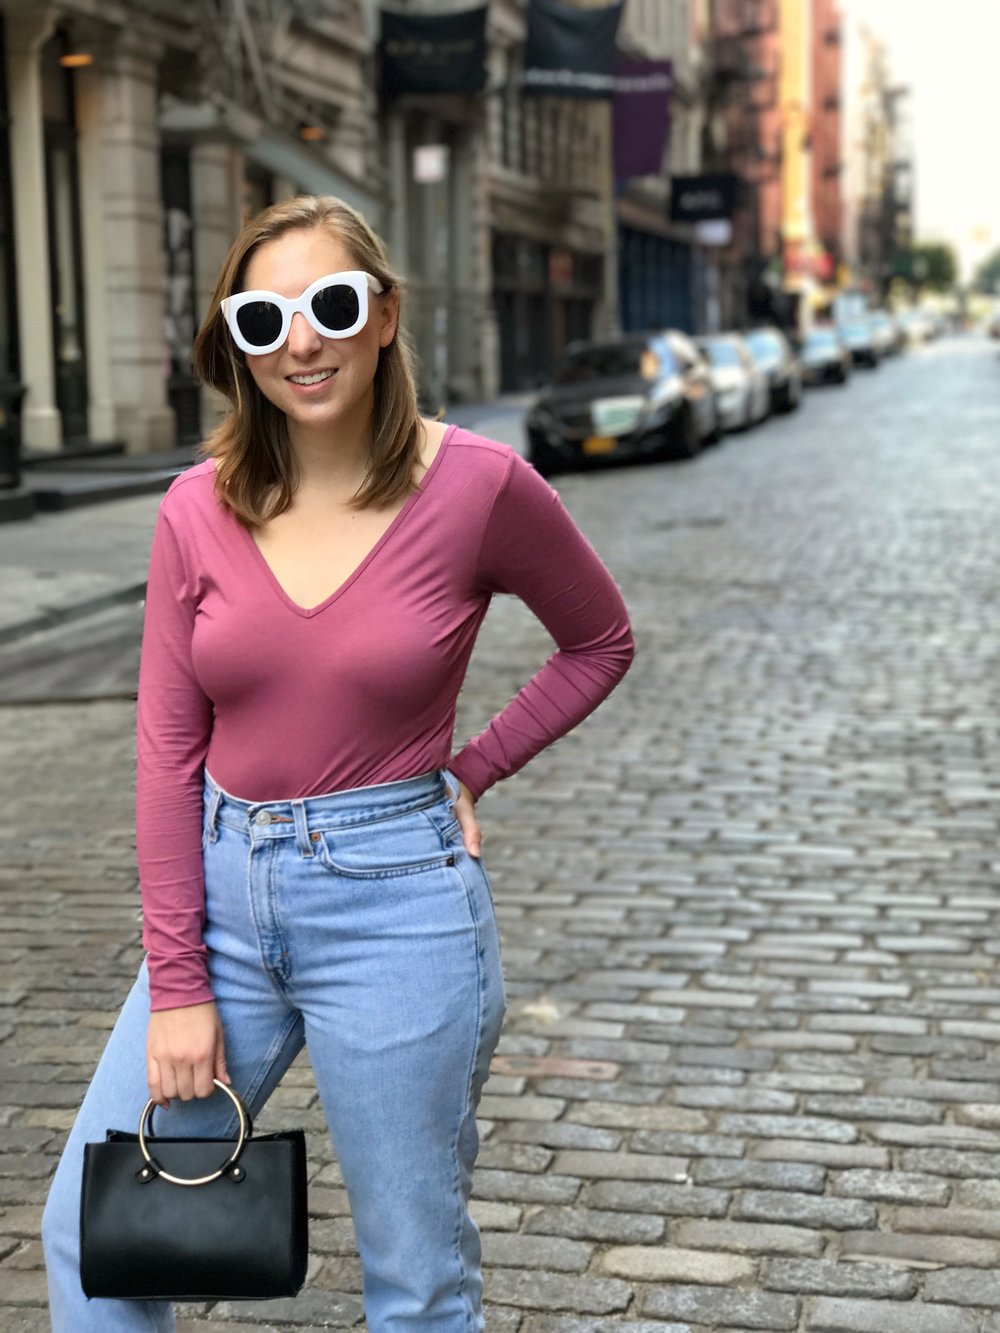 Vintage Levi's Jeans from L Train Vintage - How to Shop for Vintage Jeans When You're Petite &amp; Curvy